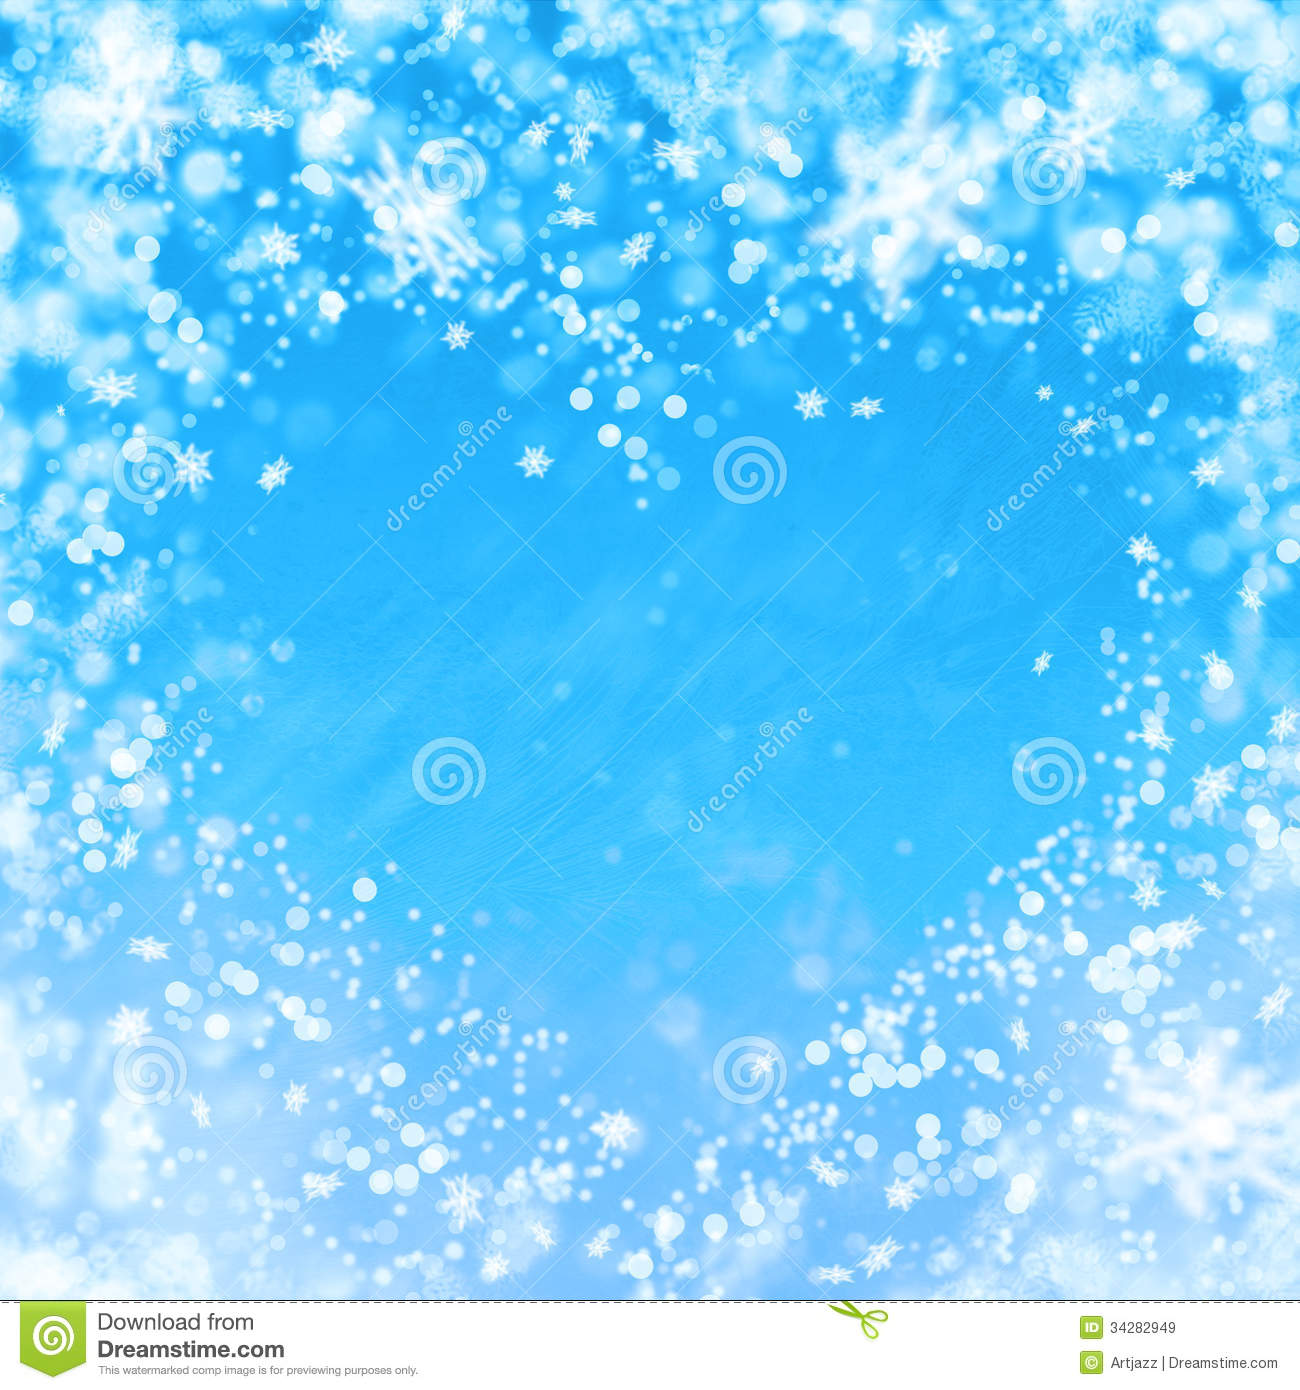 Displaying Image For Winter Snowflakes